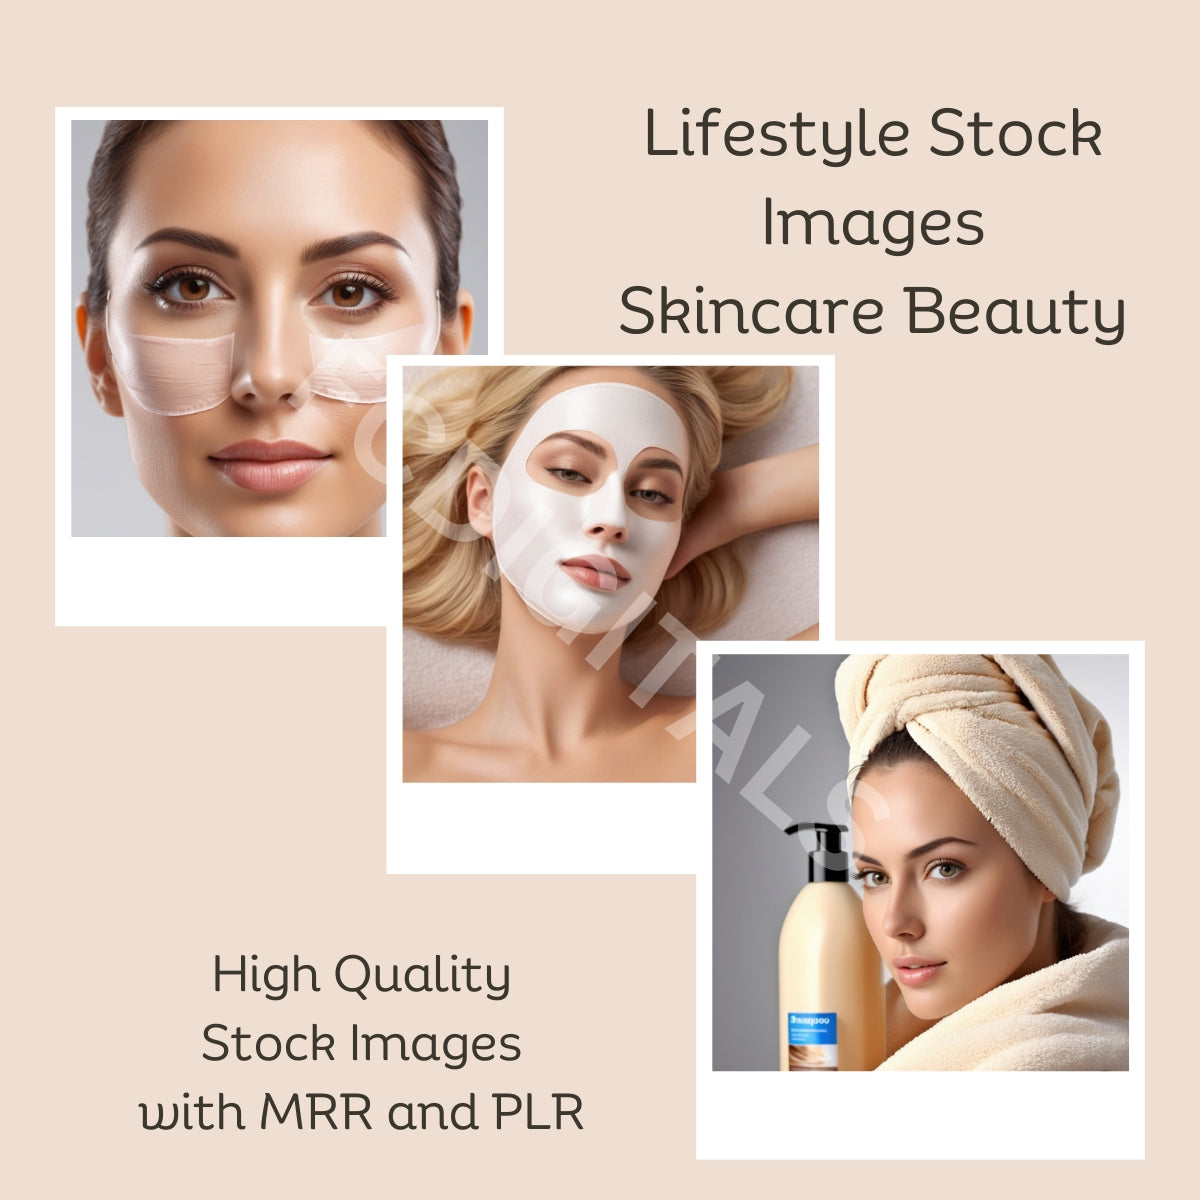 Skincare Stock Images, Skincare Social Media Posts, Beauty Stock Photos with Commercial Use, Instagram Photos, Digital Marketing, PLR & MRR